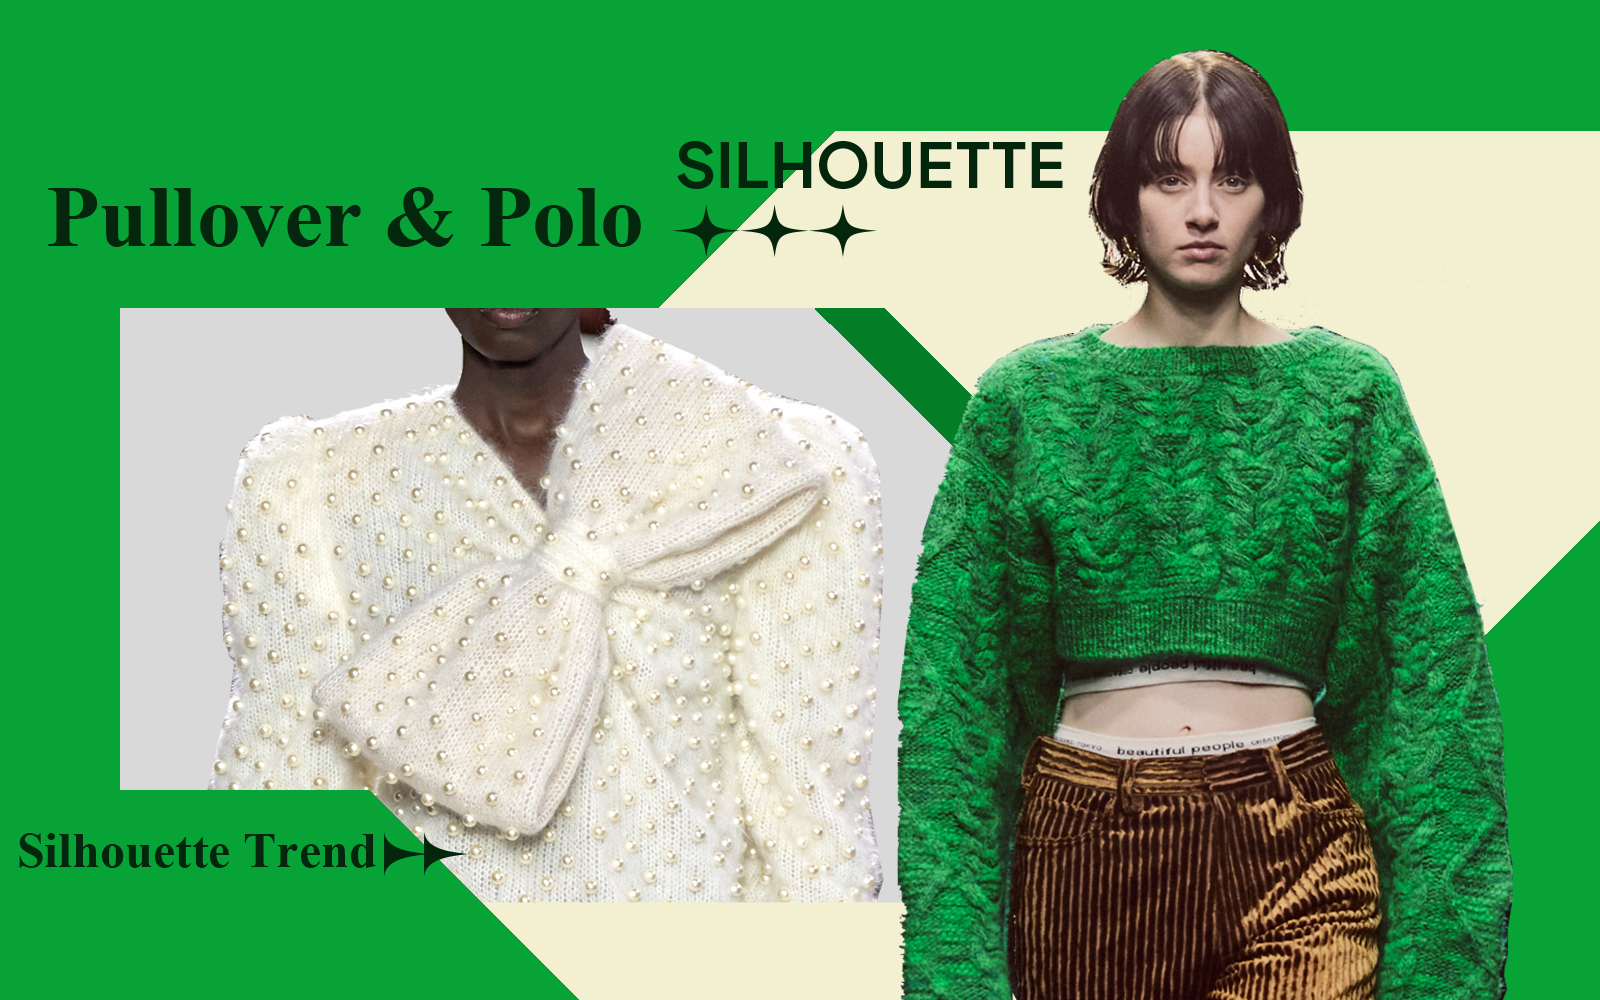 Pullover & Polo -- The A/W 24/25 Women's Knitwear Trend